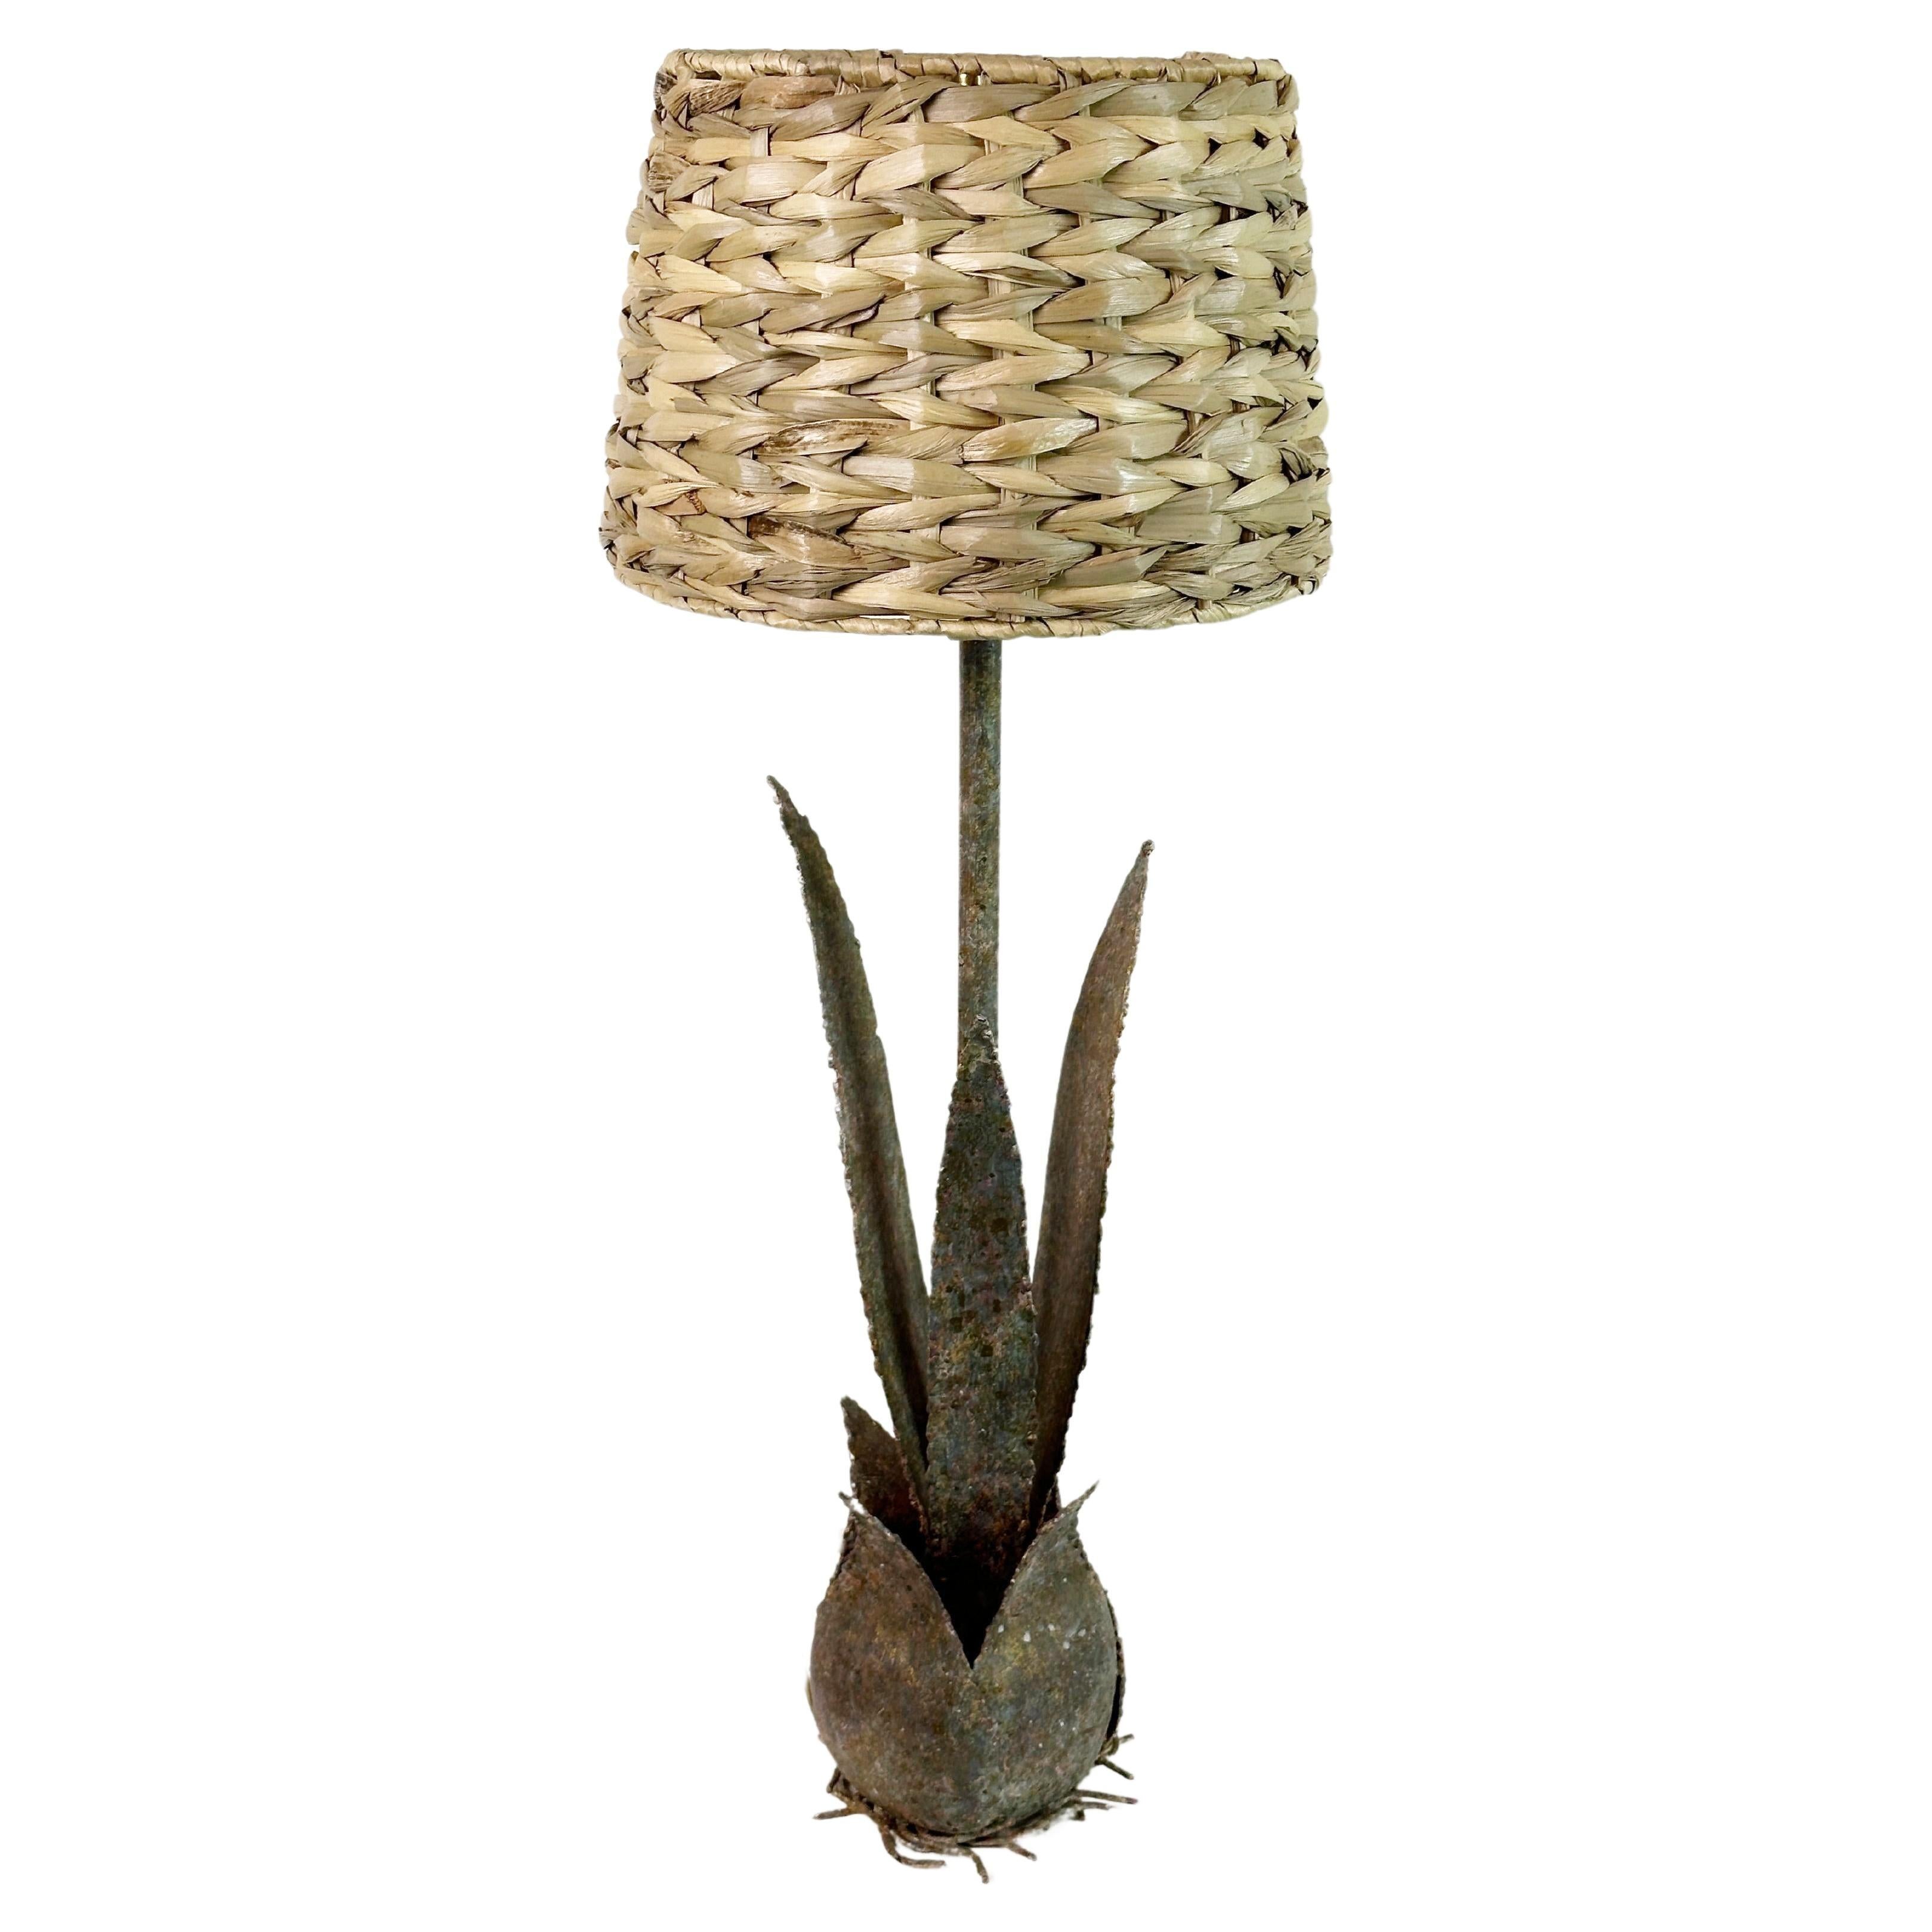 This pair of designed metal cactus table lamps showcases the charm of the Hollywood Regency style with a contemporary twist.

Each lamp is crafted from patinated metal, ensuring durability and longevity. The three whimsical cactus leaves with their